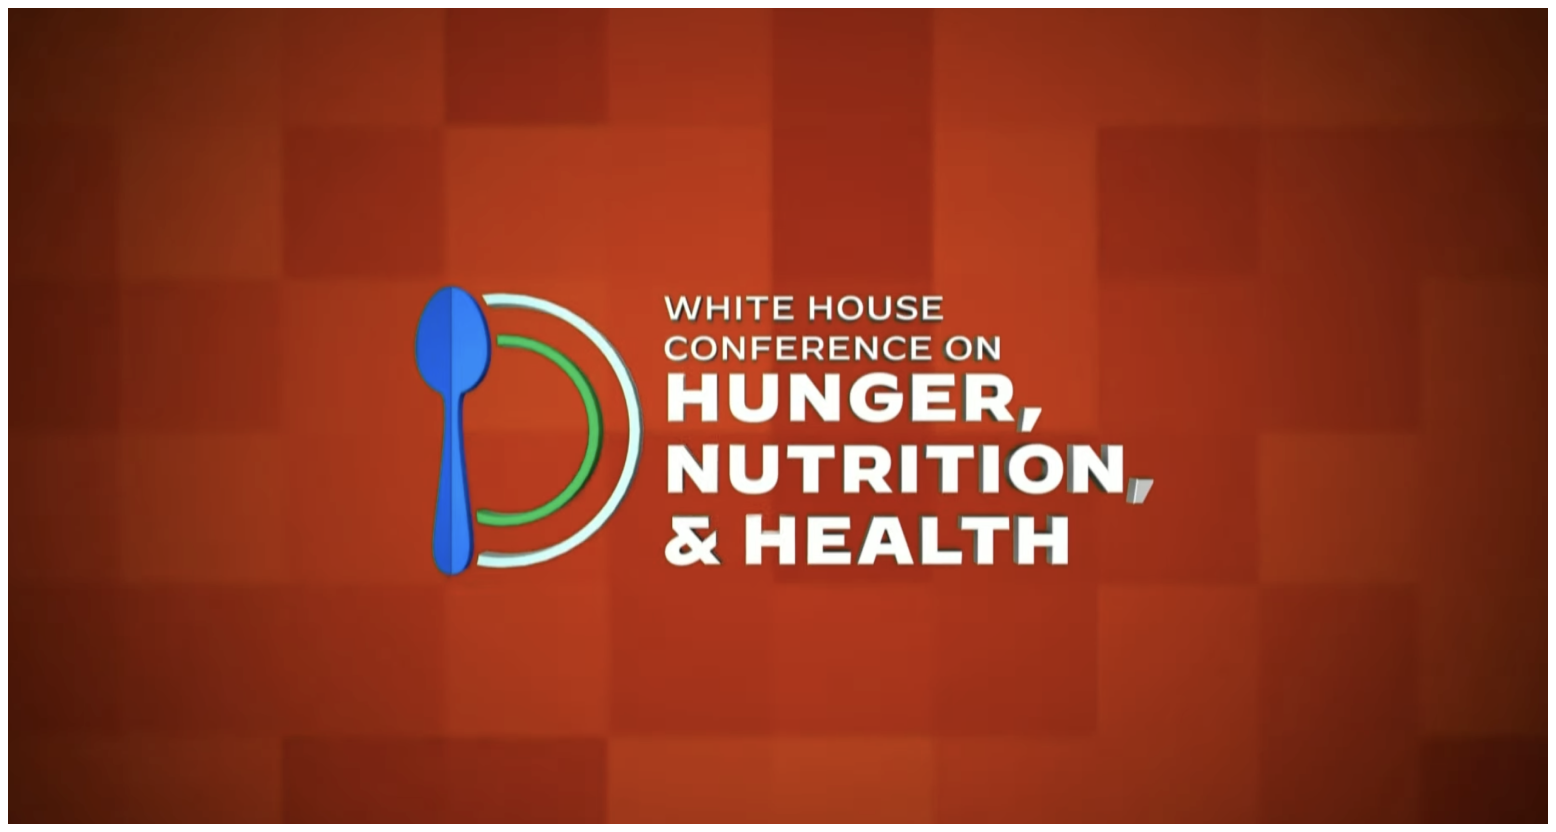 White House Conferece on Hunger, Nutrition, and Health